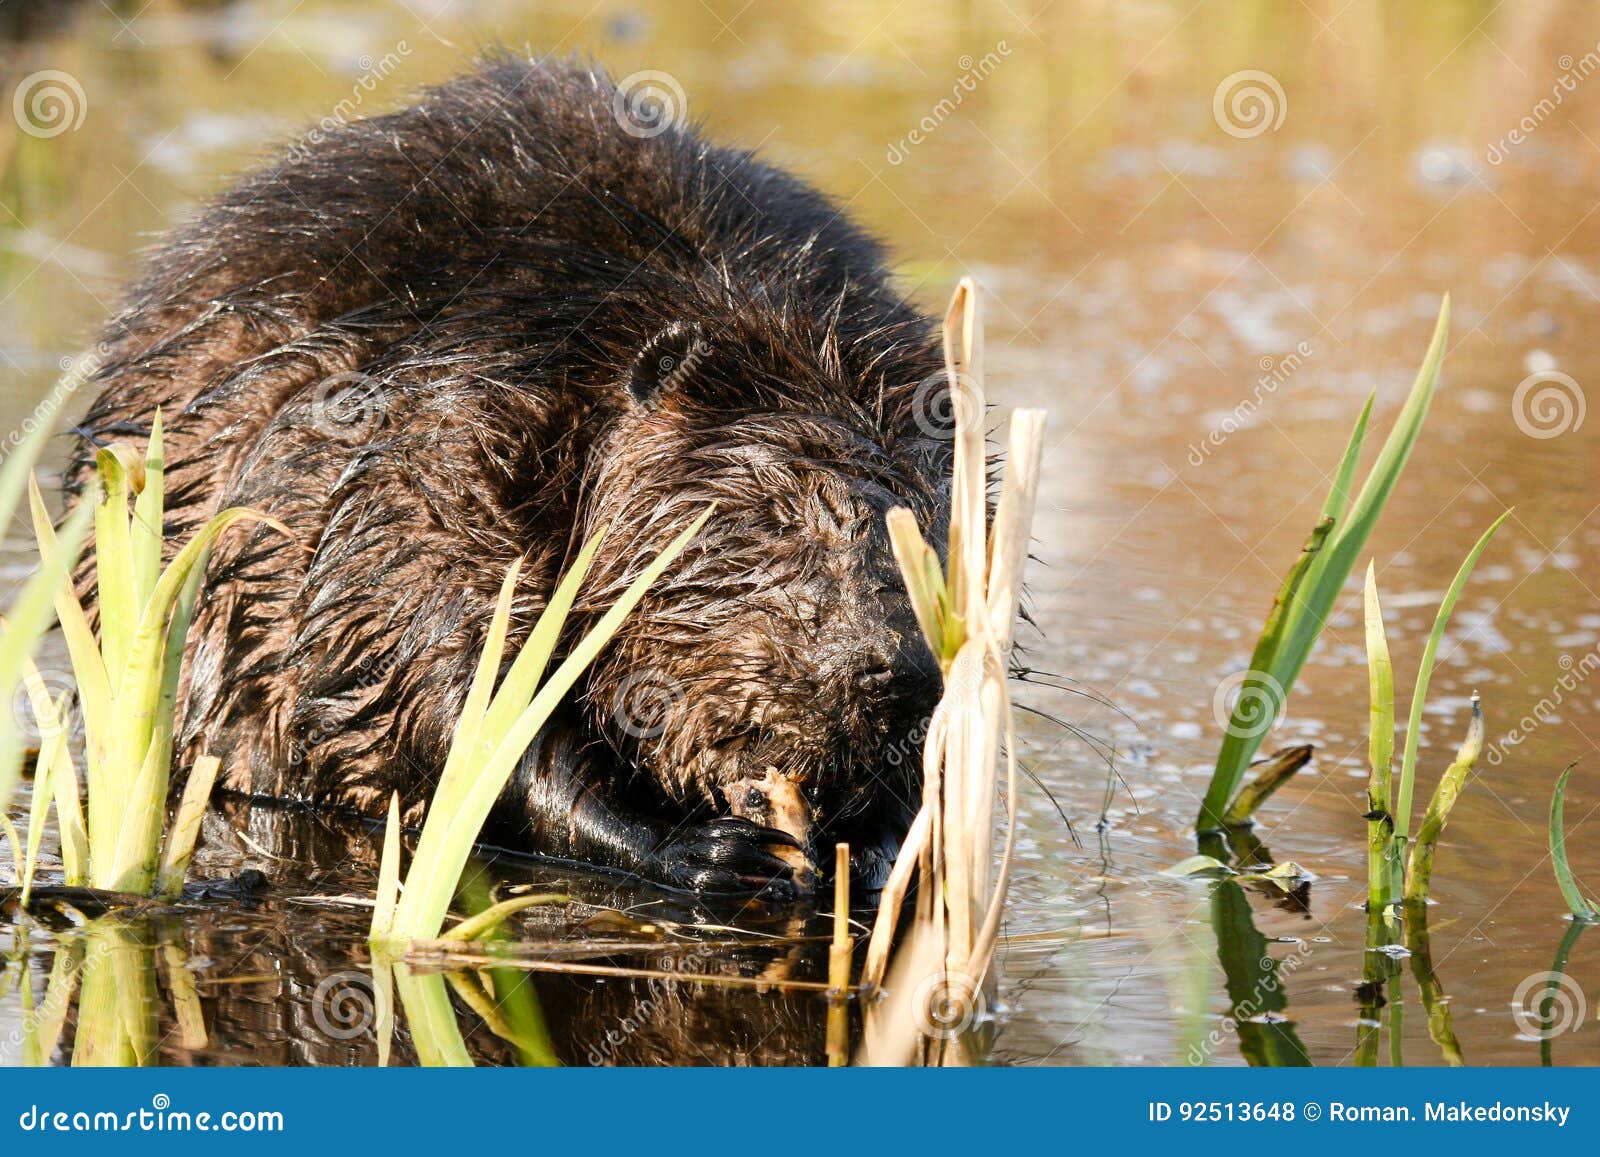 Beaver Munching on Juicy Roots in the Shallow Lake Water. Beaver Canadian  National Animal. Stock Photo - Image of pond, gnaw: 92513648